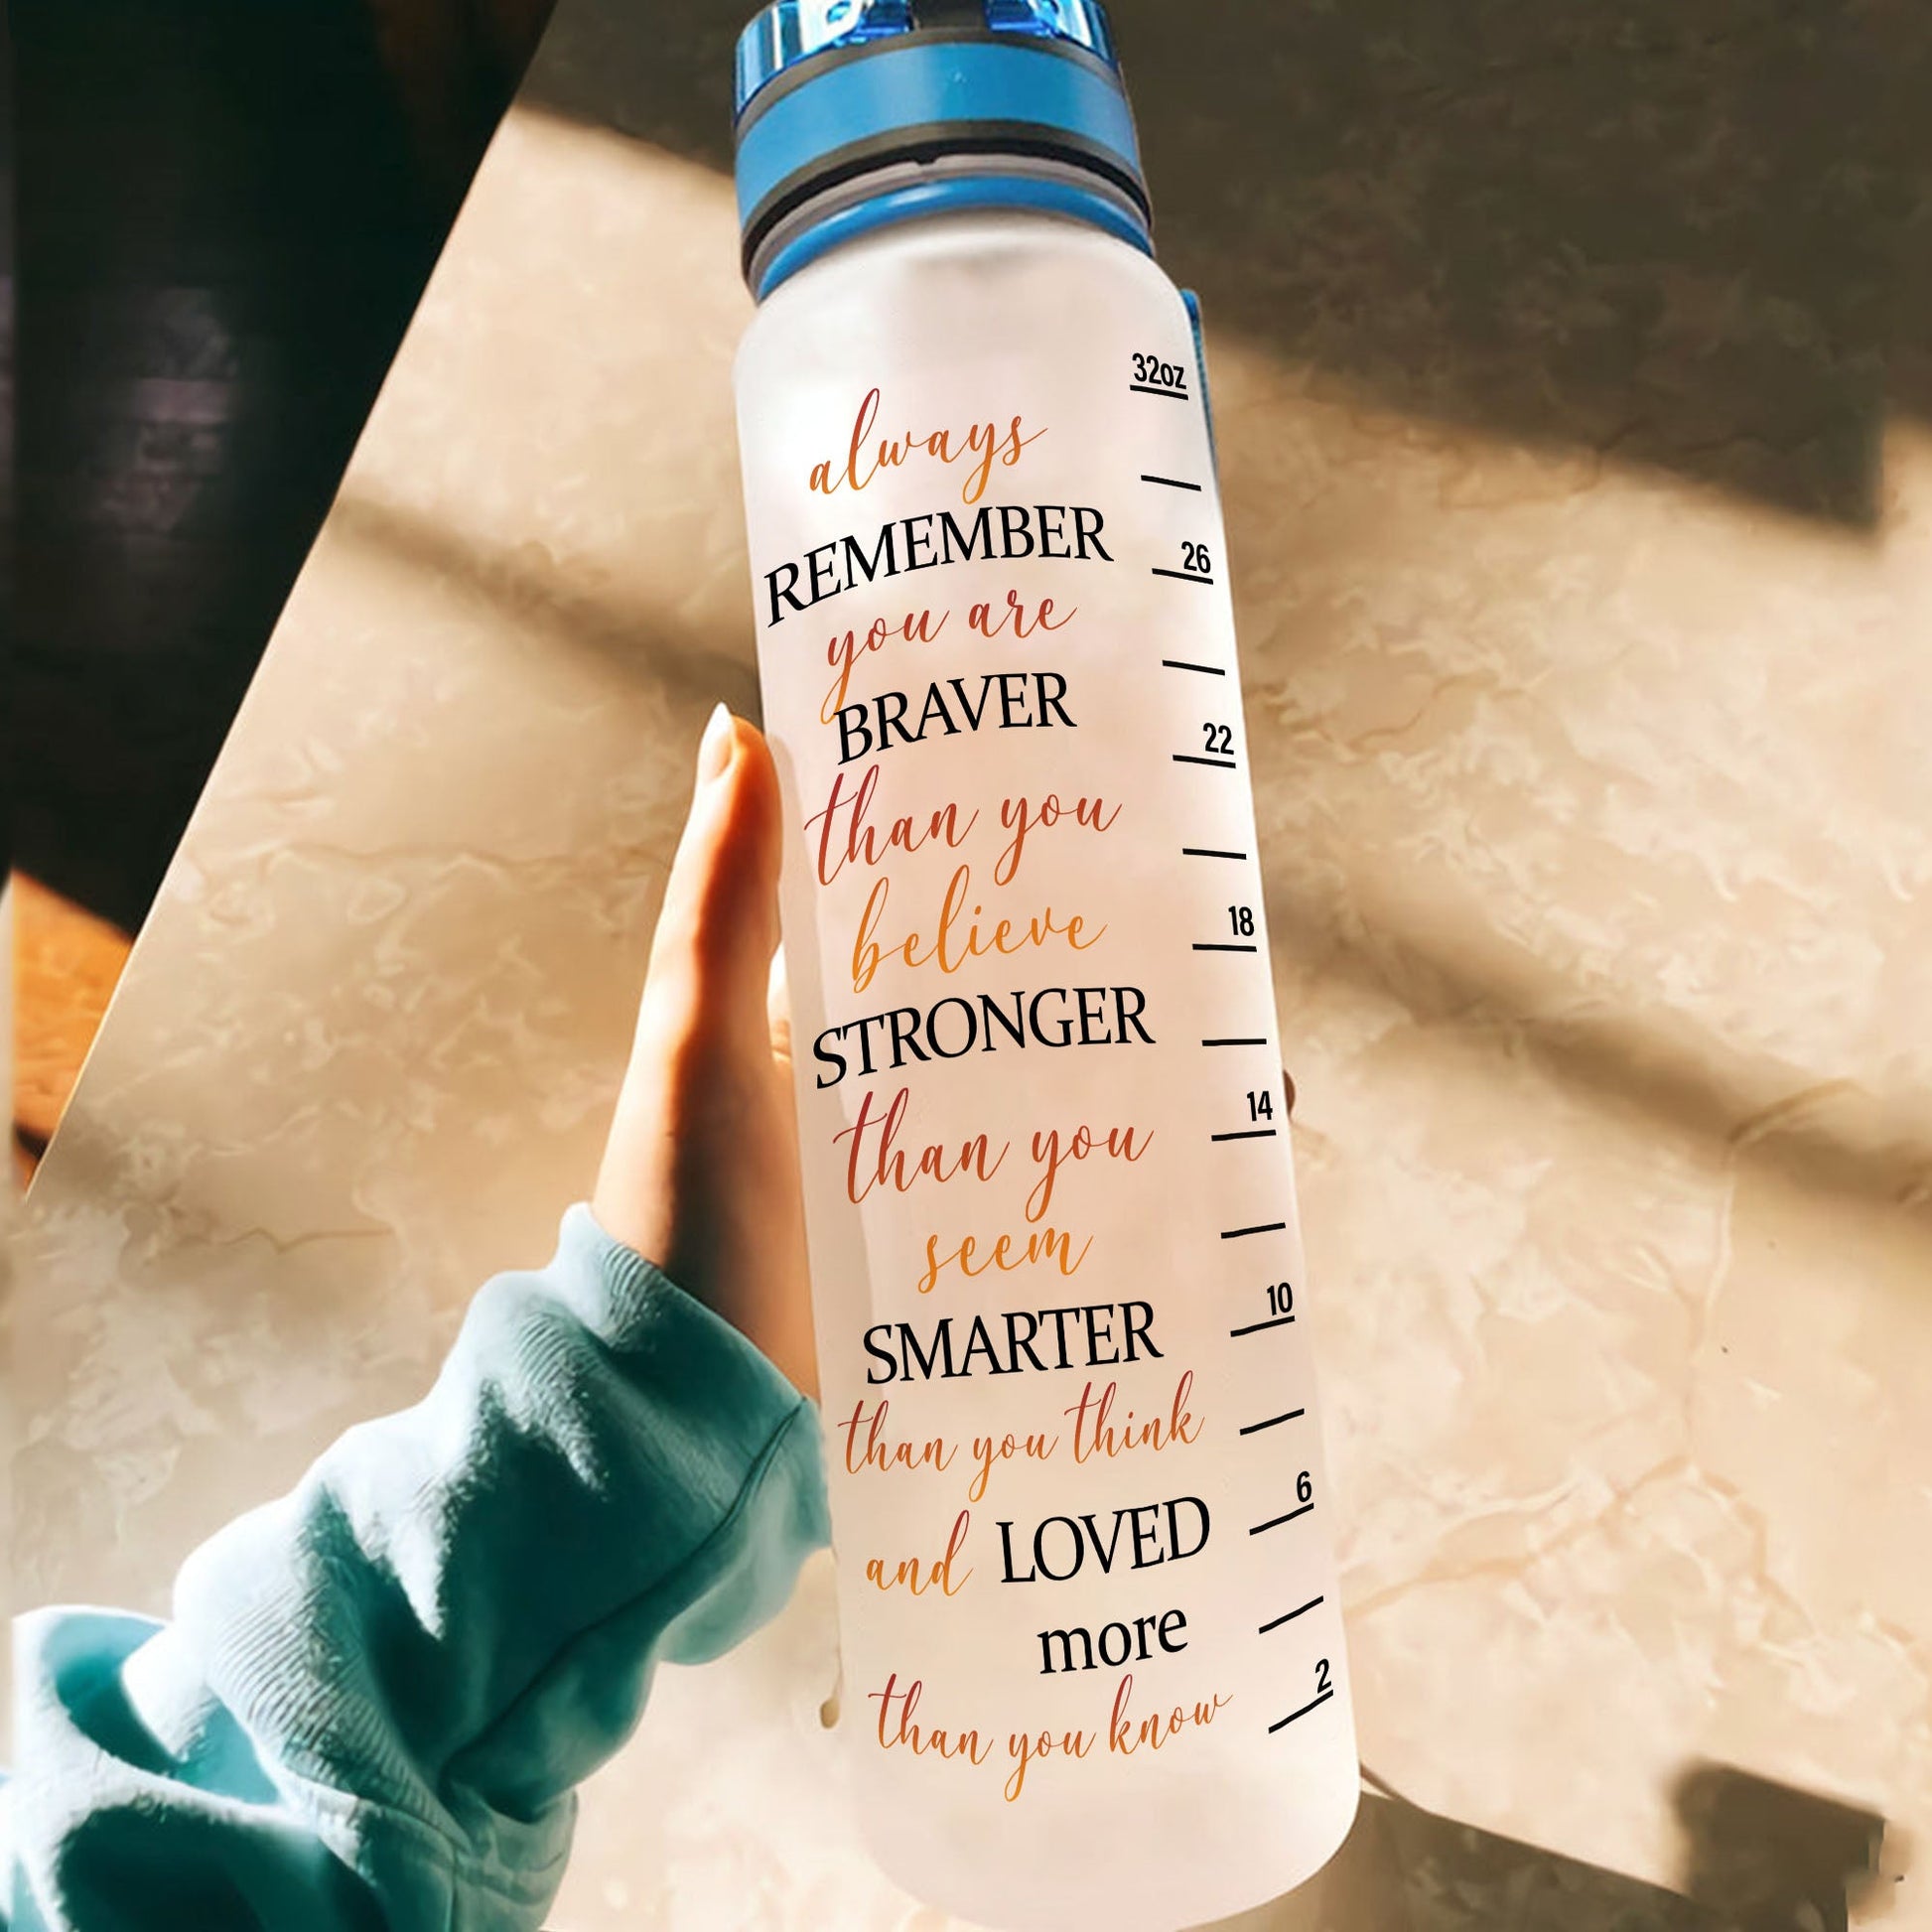 Smart Loved Brave Confident - Personalized Kids Water Bottle With Stra –  Macorner